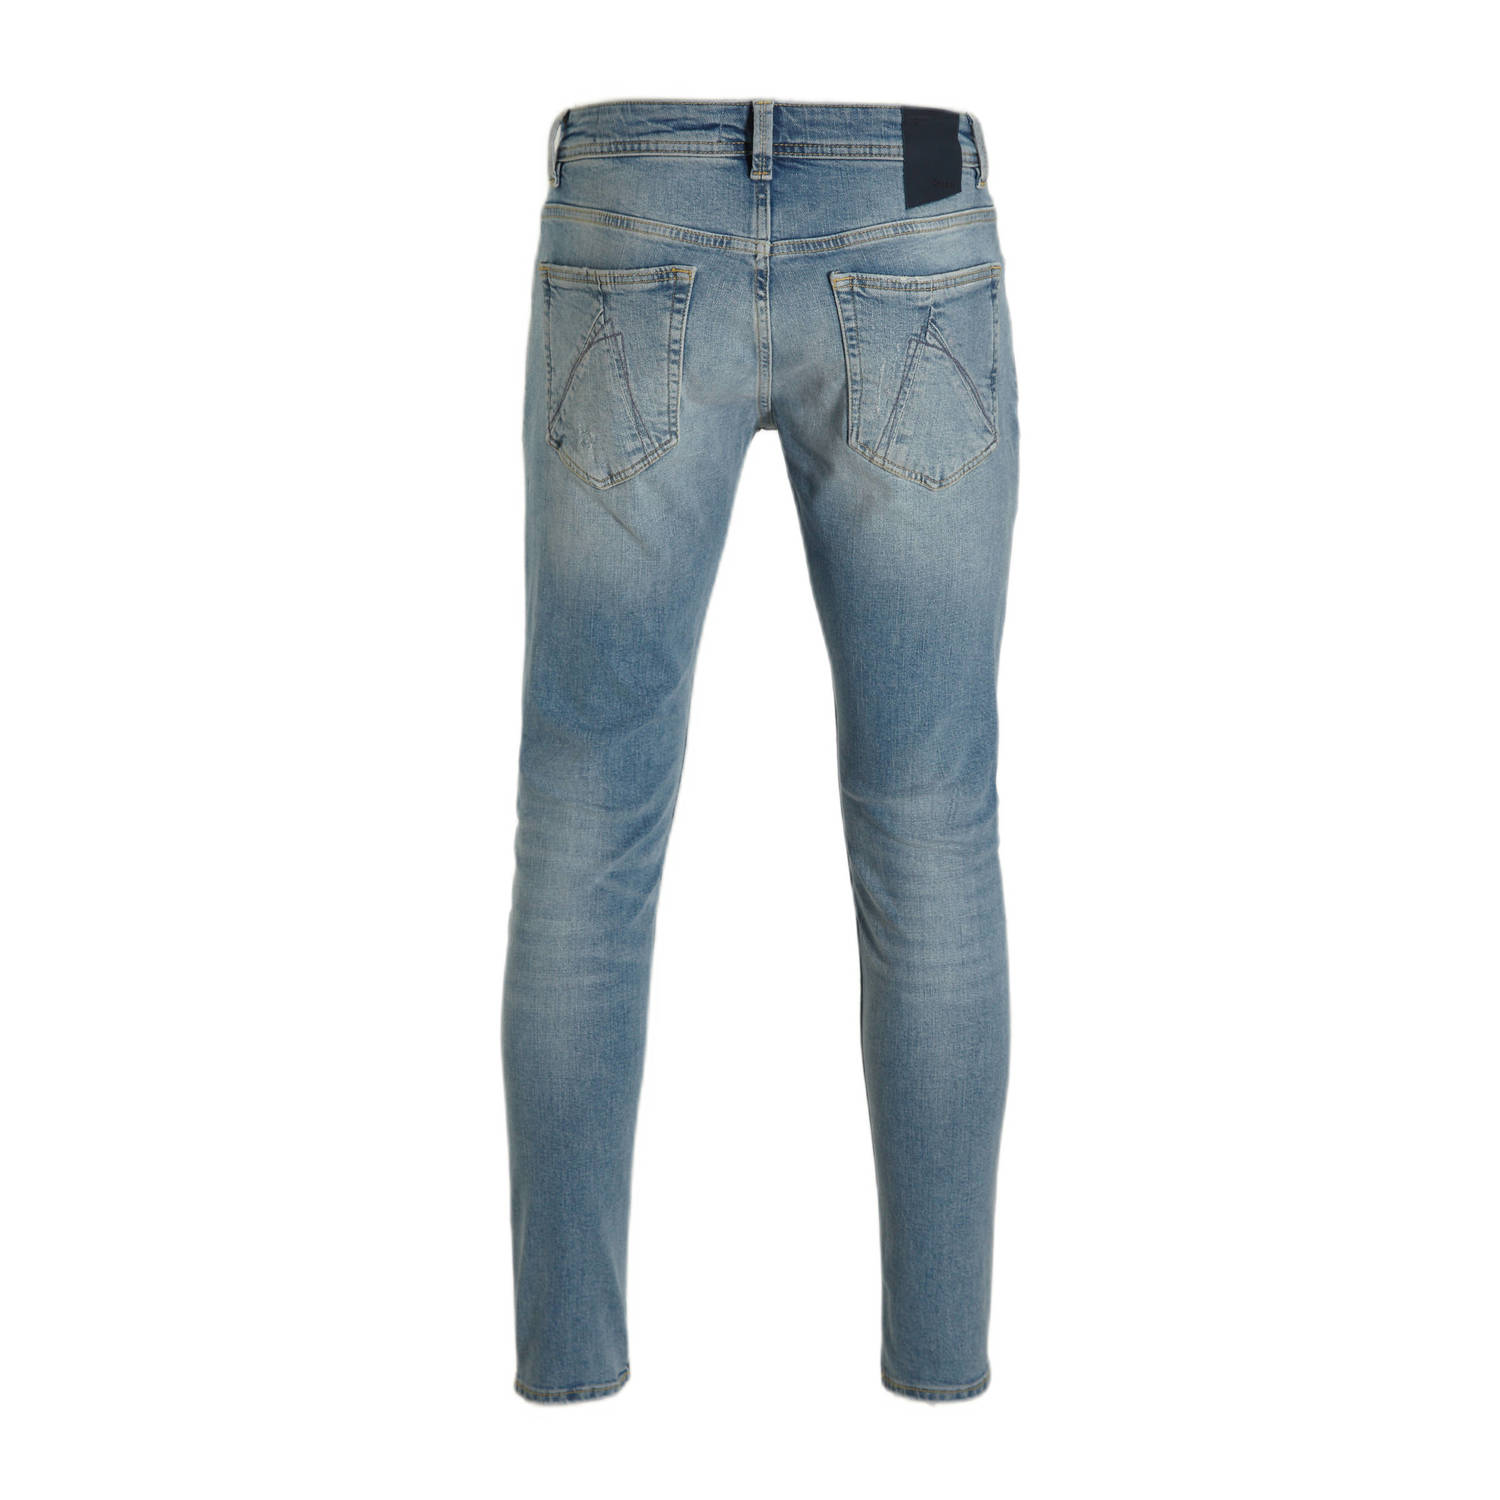 CHASIN' tapered fit jeans Ego Duke light blue repaired